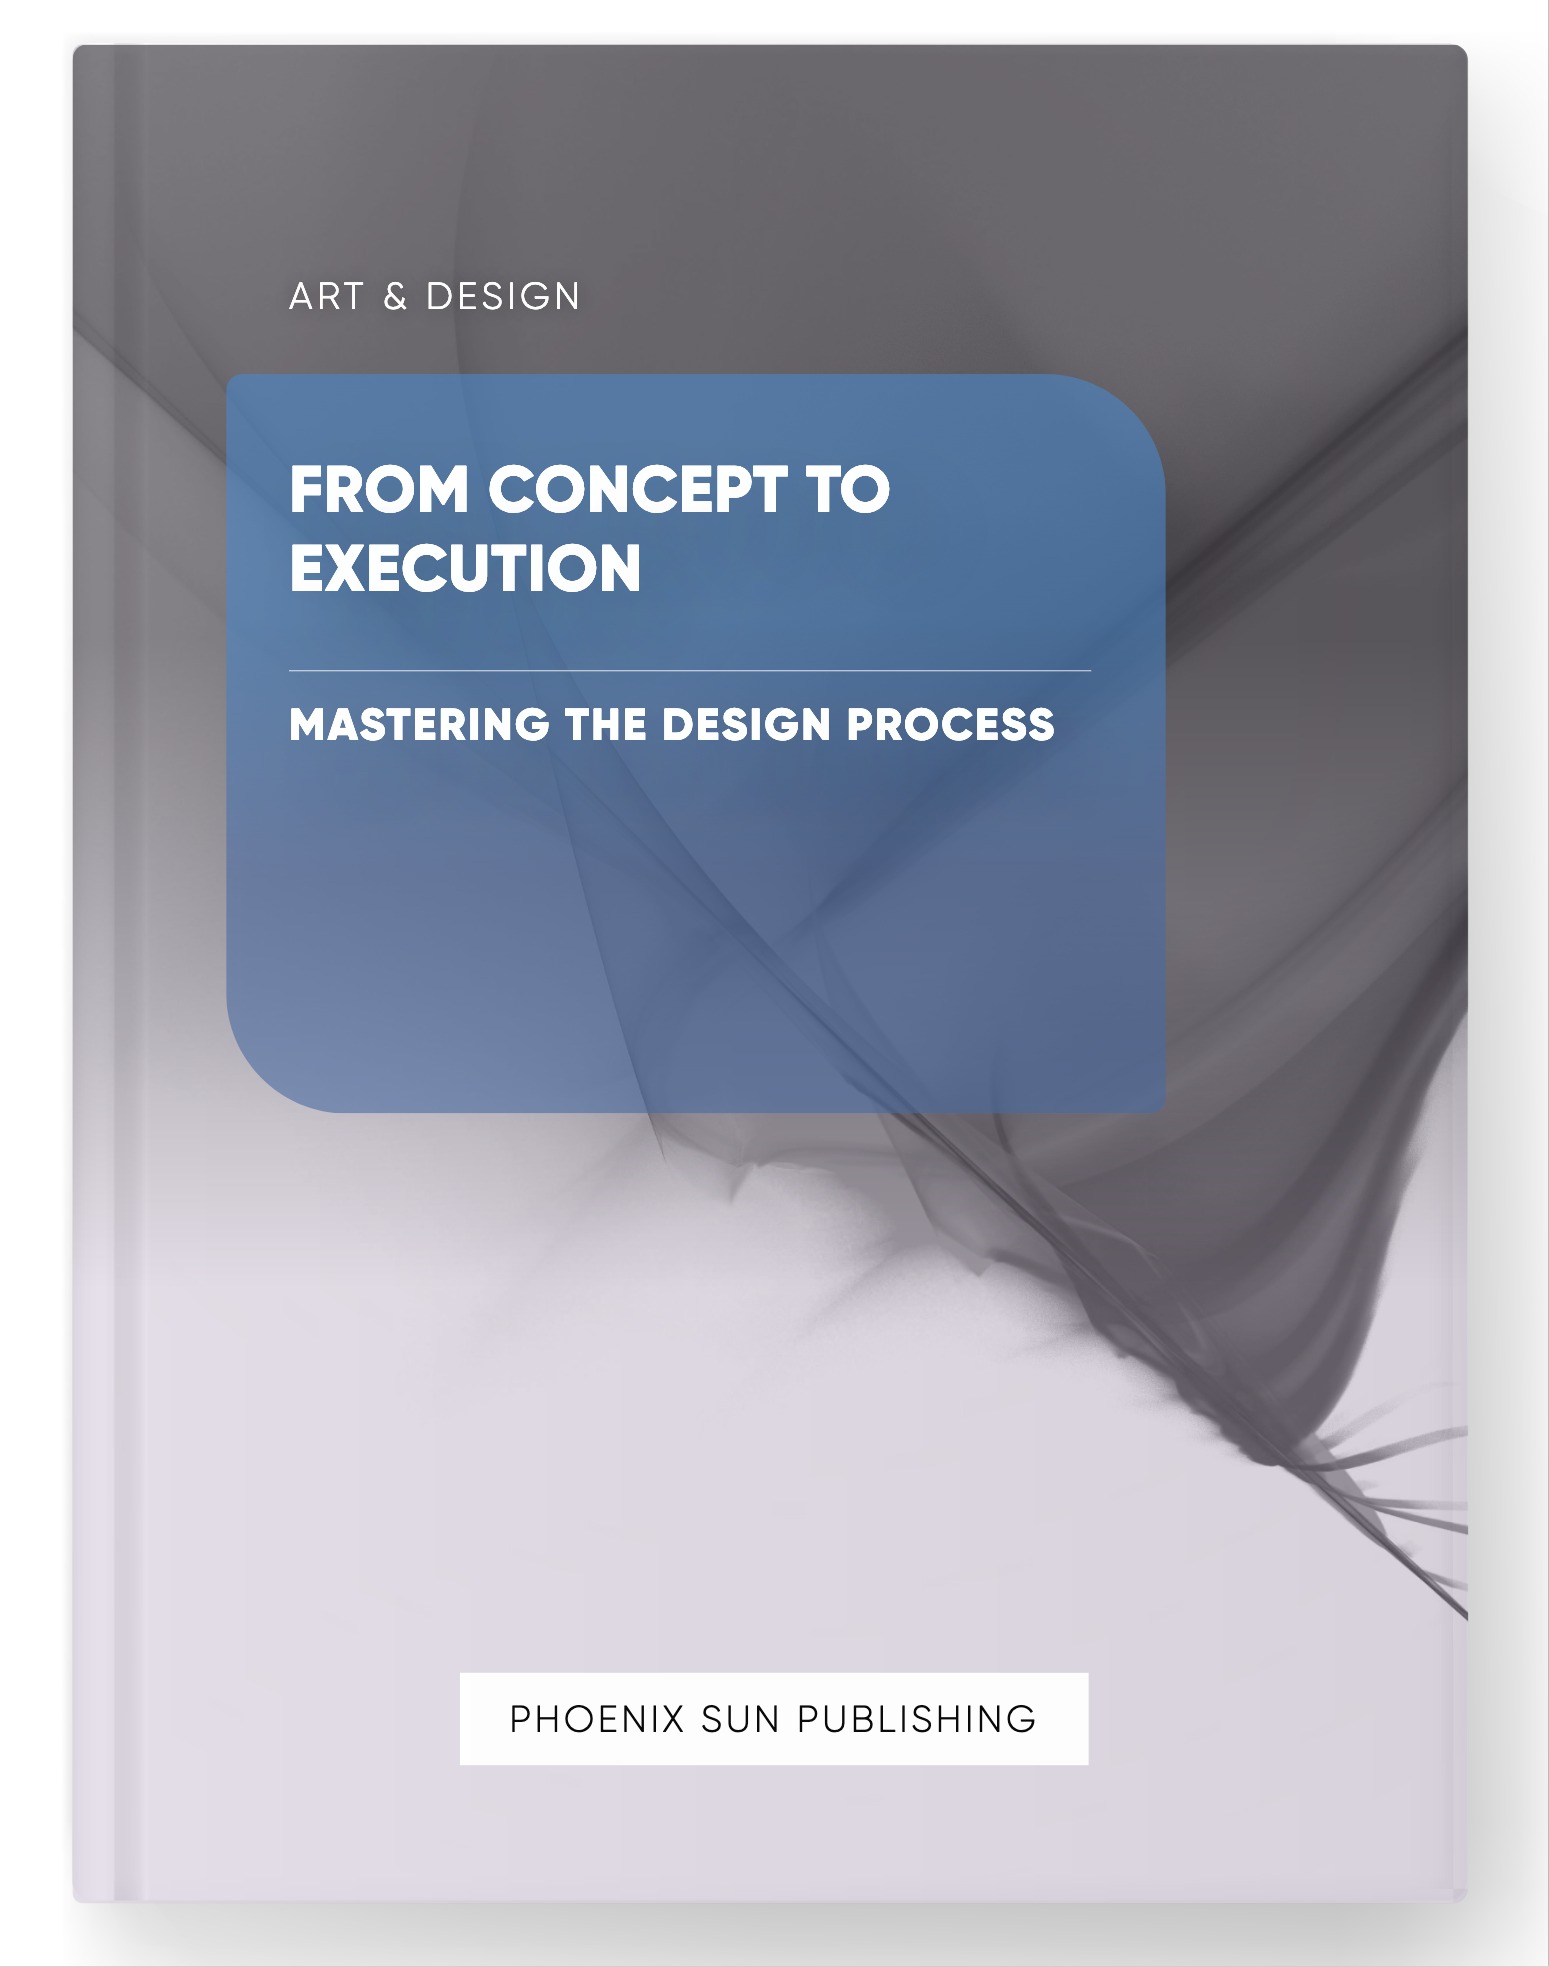 From Concept to Execution – Mastering the Design Process